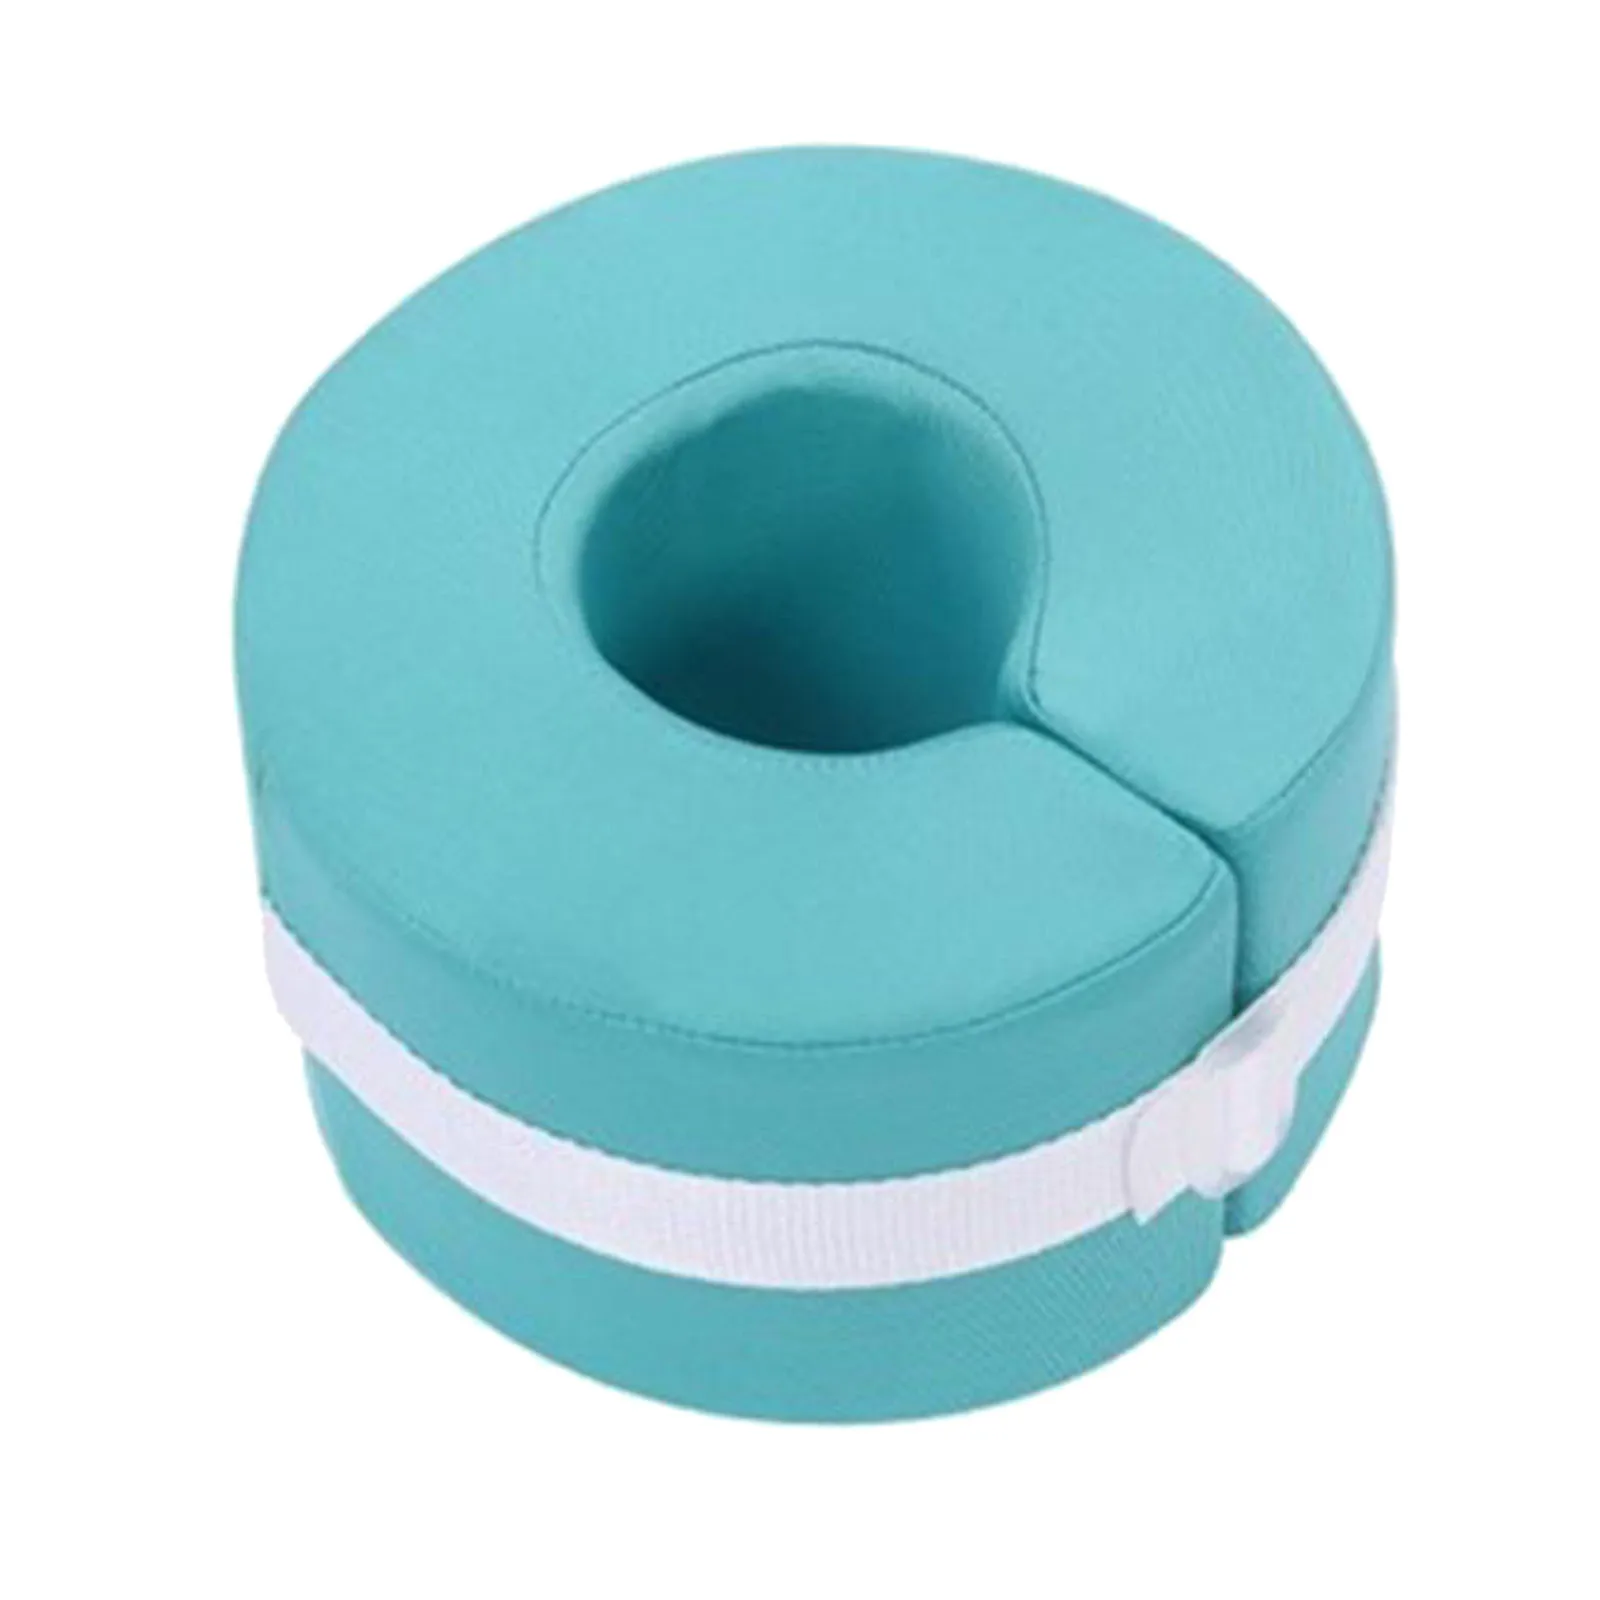 Anti-Bedsore Cushion Pad, Cushion Protector Pillow for Hand Foot Pressure  Relief, Donut Cushion Support for Elbow, Ankle, Leg, Hip